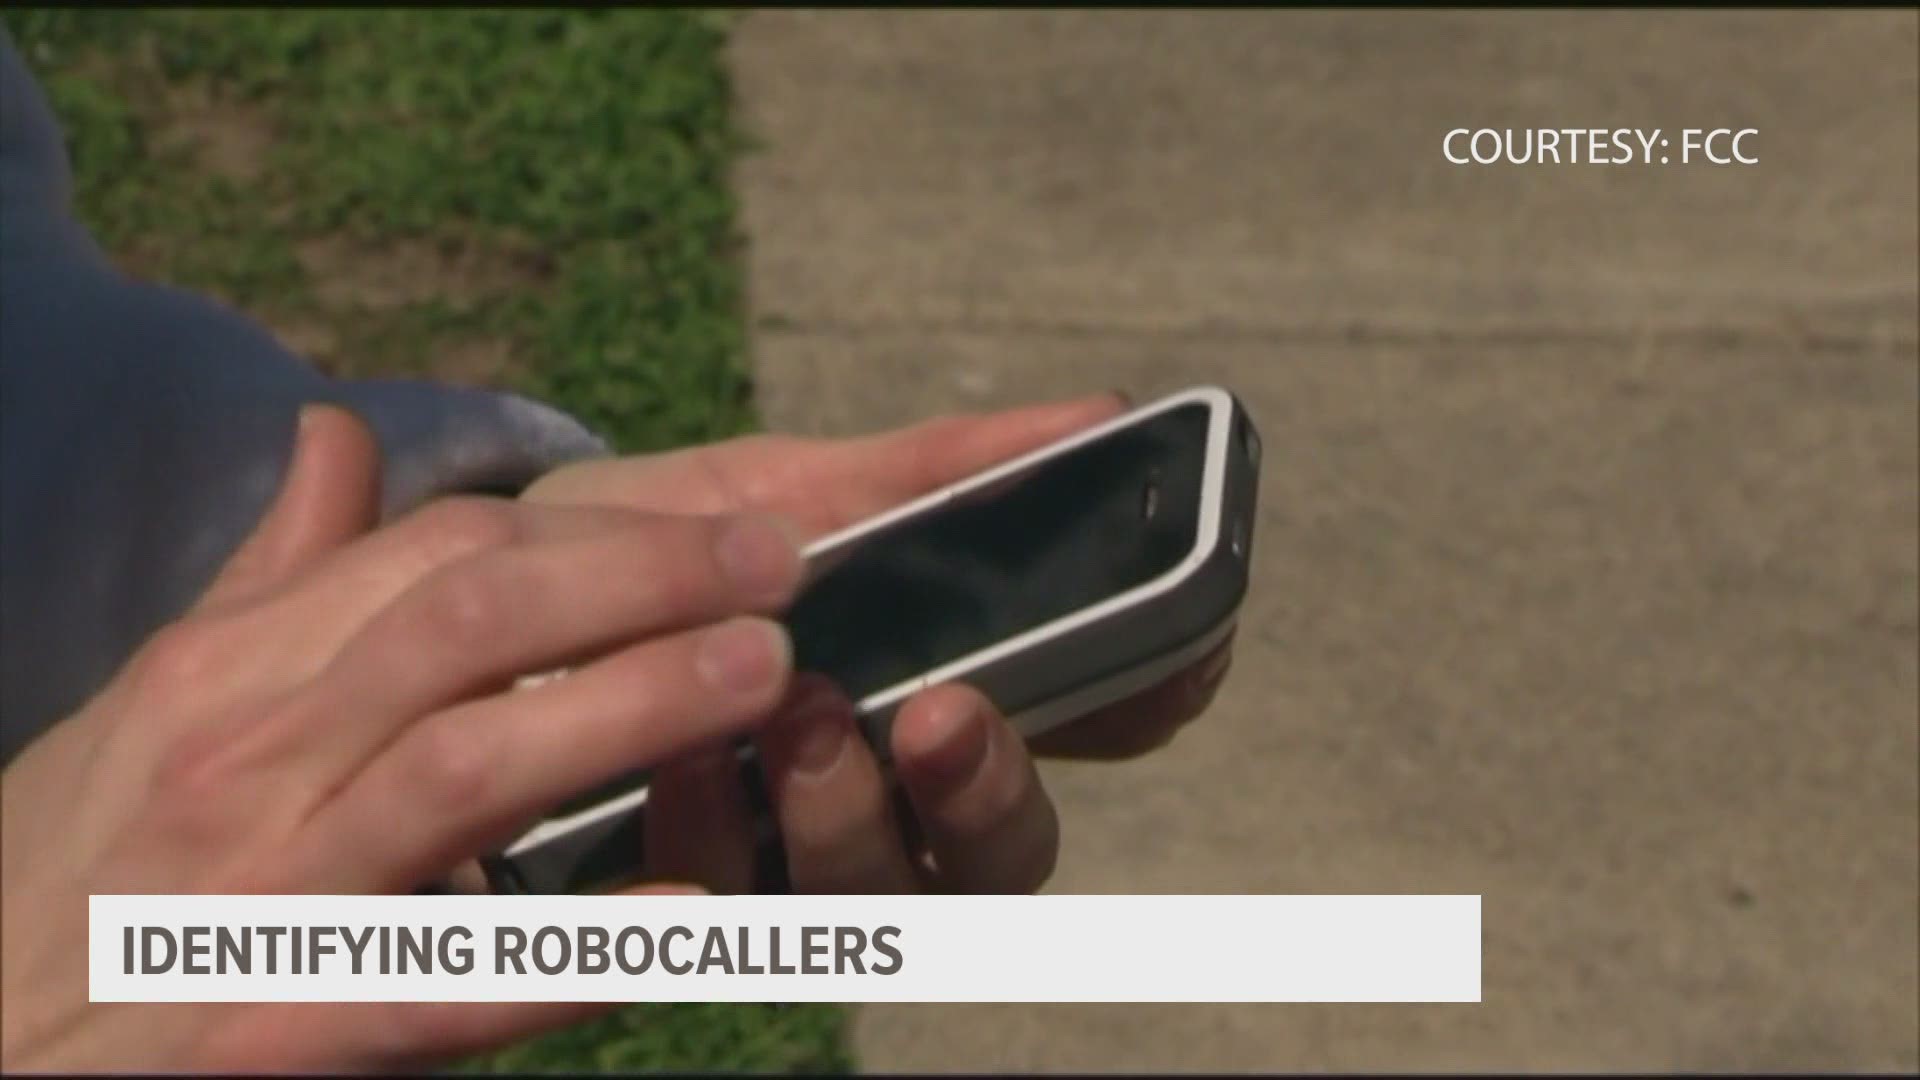 So far in 2021, 965,020 Do Not Call complaints against robocalls are on file, according to the Federal Trade Commission.